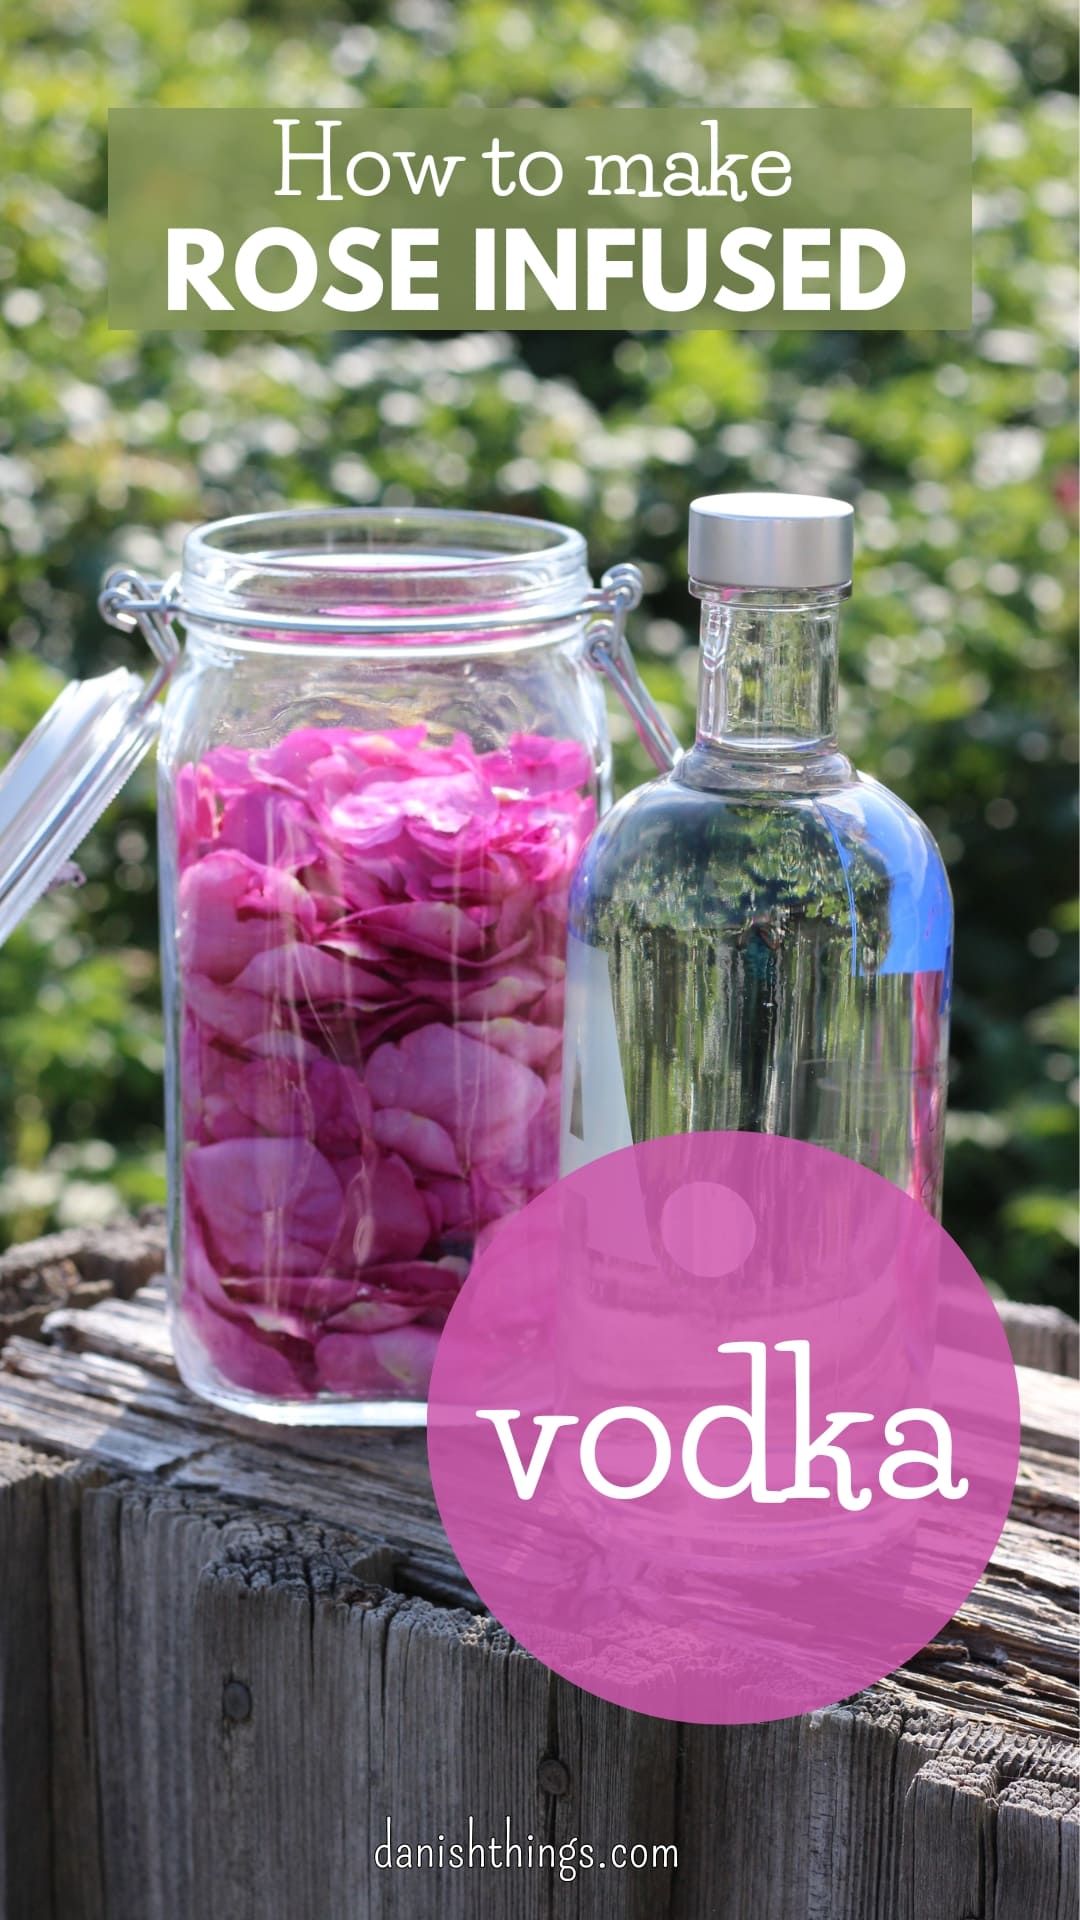 How to make your own rose-infused alcohol in days  - make gin or vodka with a subtle flavour of roses. Add a personal touch to your cocktails and long drinks using homemade rose gin and rose vodka. Find recipes, prints, and inspiration for all seasons at danishthings.com © Christel Parby Danish Things #DanishThings #rosehip #rosevodka #rosegin #rose #roses #gin #rosehippetals #vodka #alcohol #flowers #eatnature #danish #recipe